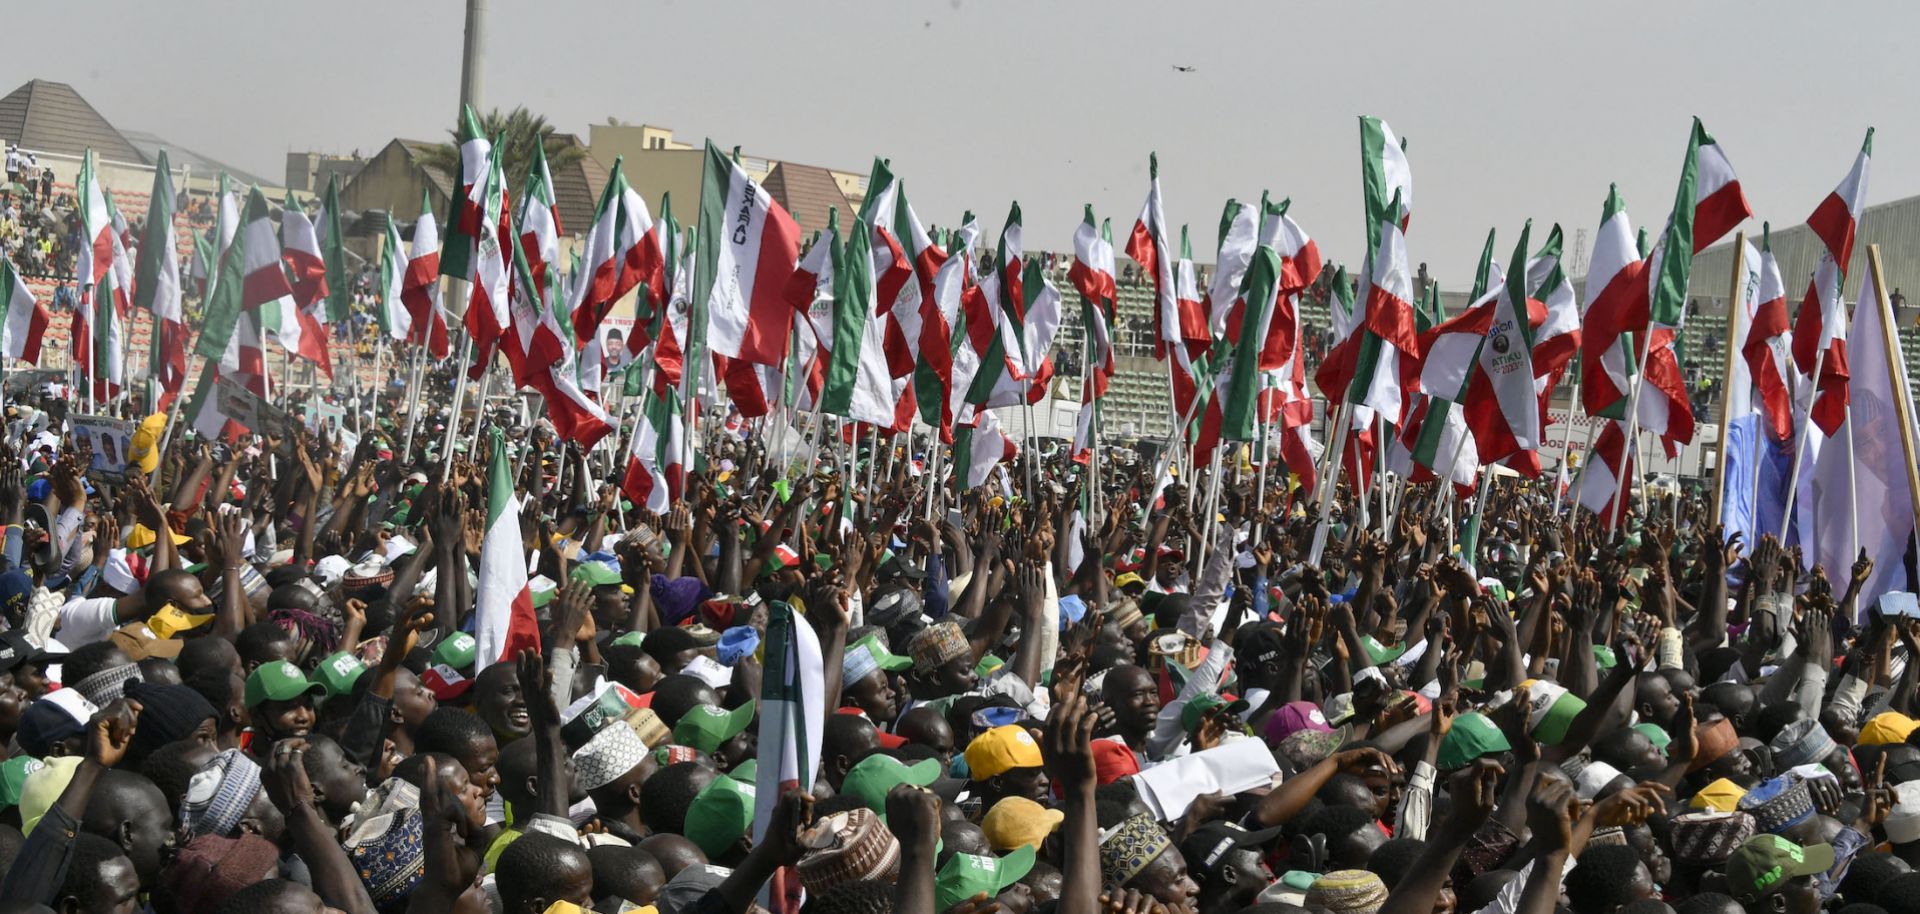 Supporters hold flags to support opposition PDP candidate Atiku Abubakar during a campaign rally in Kano state in northwestern Nigeria on Feb. 9, 2023.